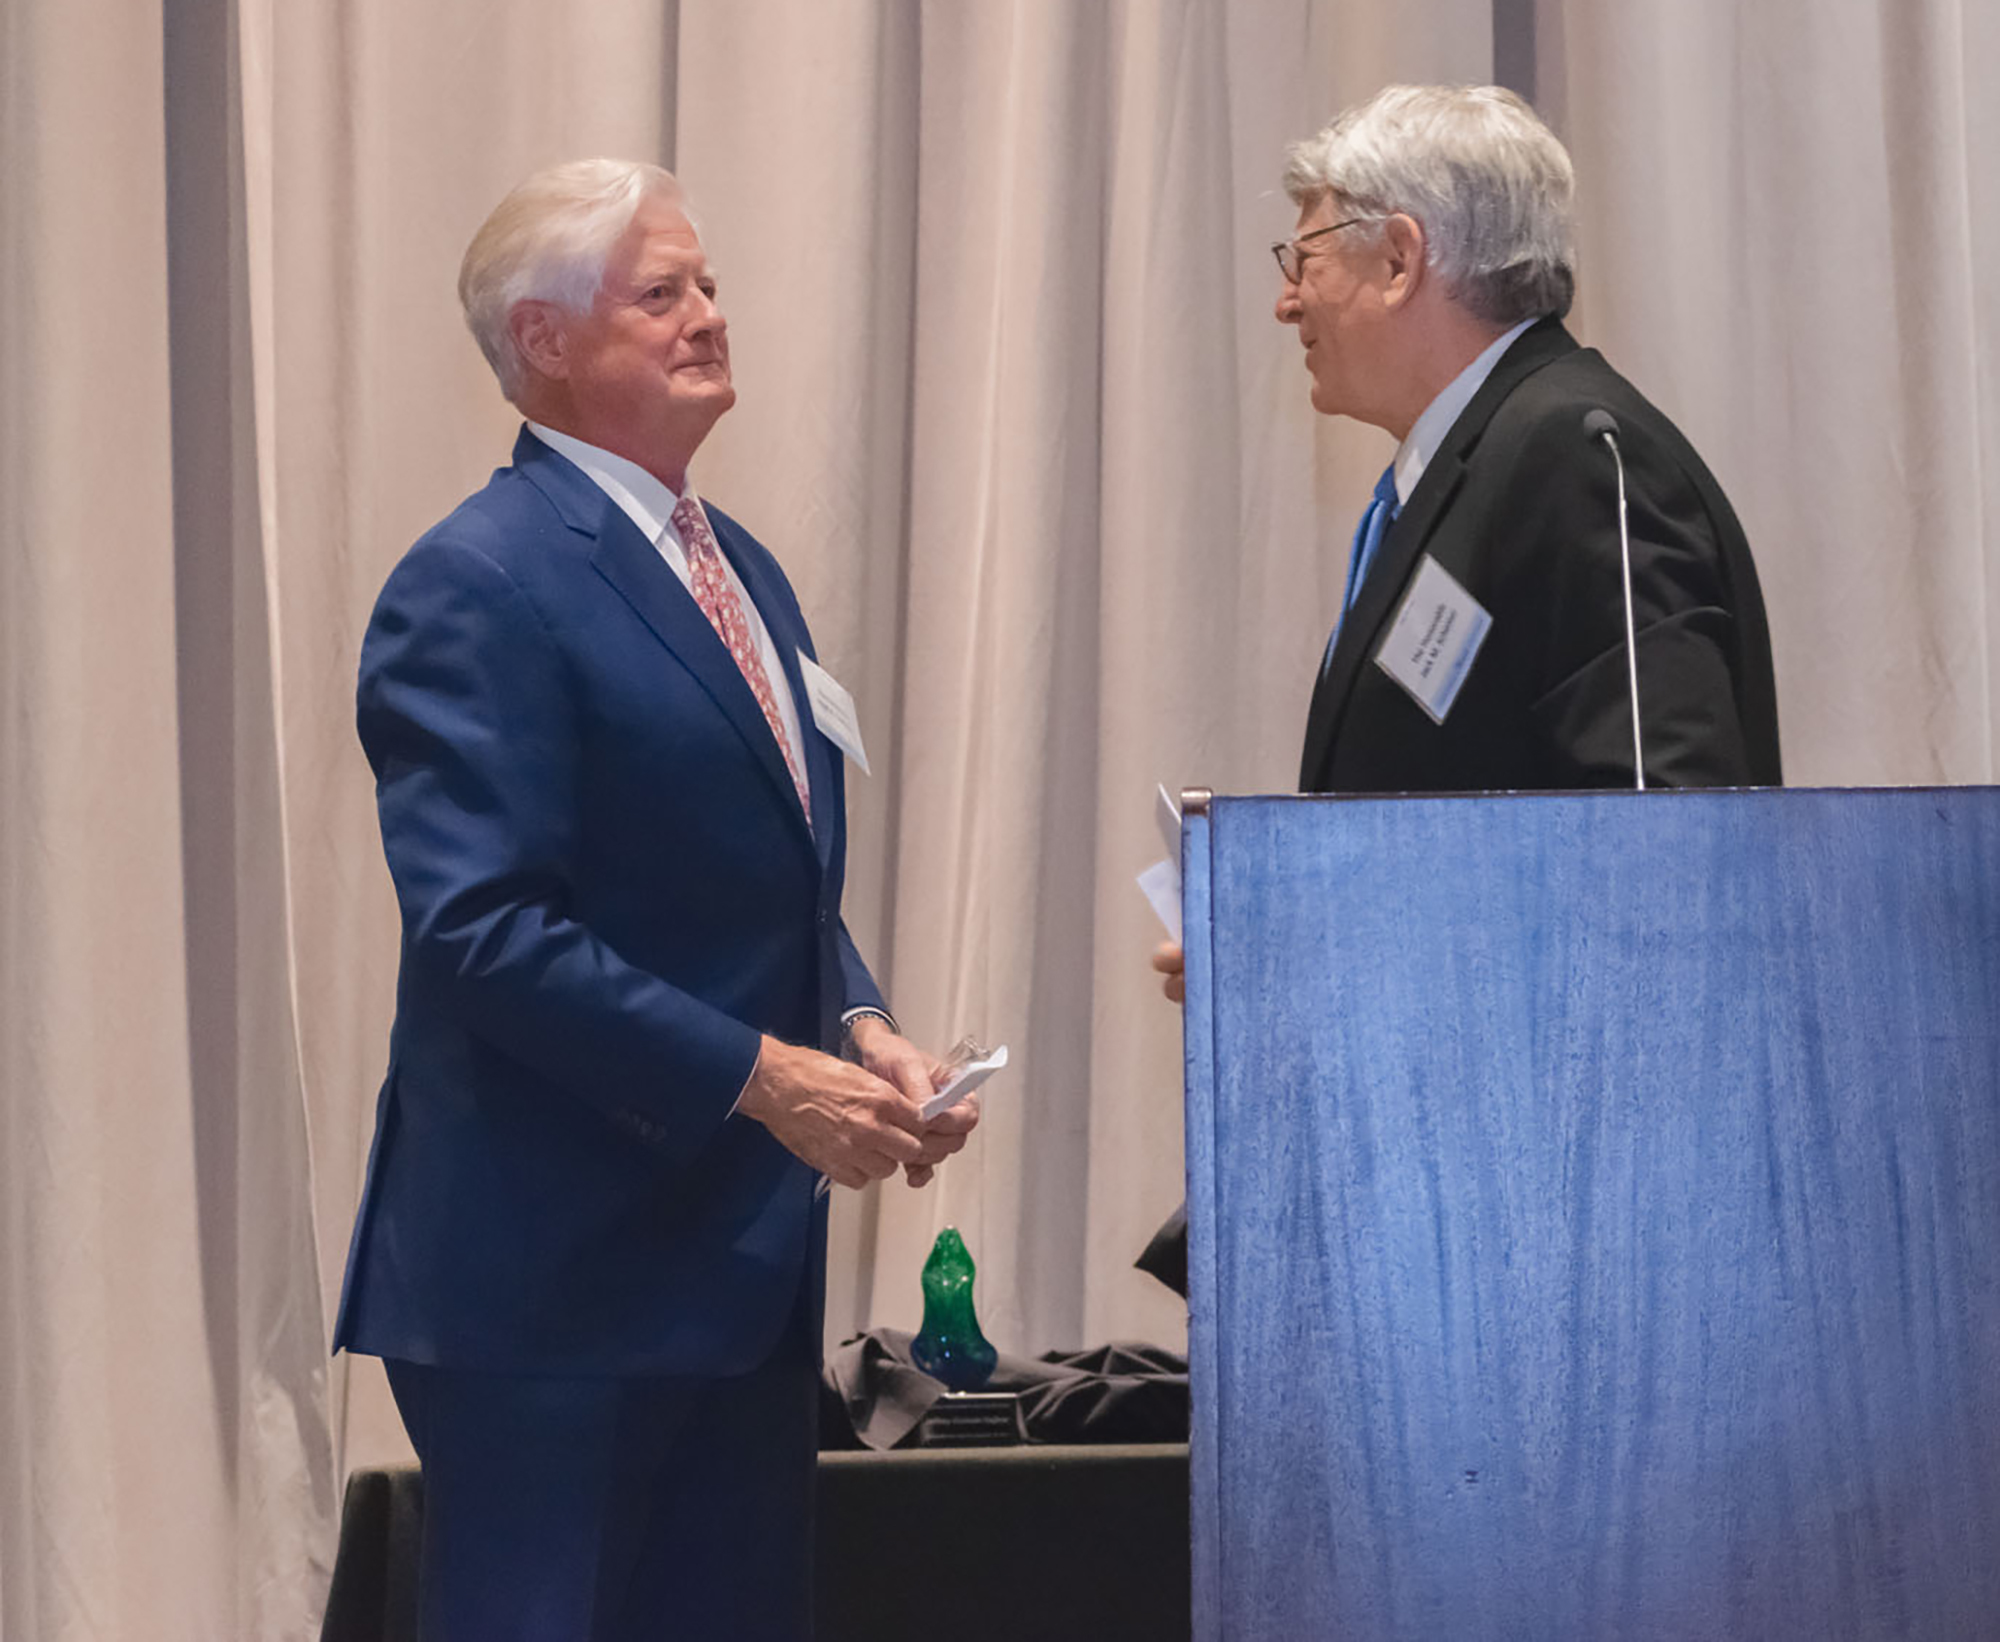 Retired 4th Circuit Judge Hugh Carithers, left, accepted Jacksonville Area Legal Aid’s 2019 Robert J. Beckham Equal Justice Award from Circuit Judge Jack Schemer.